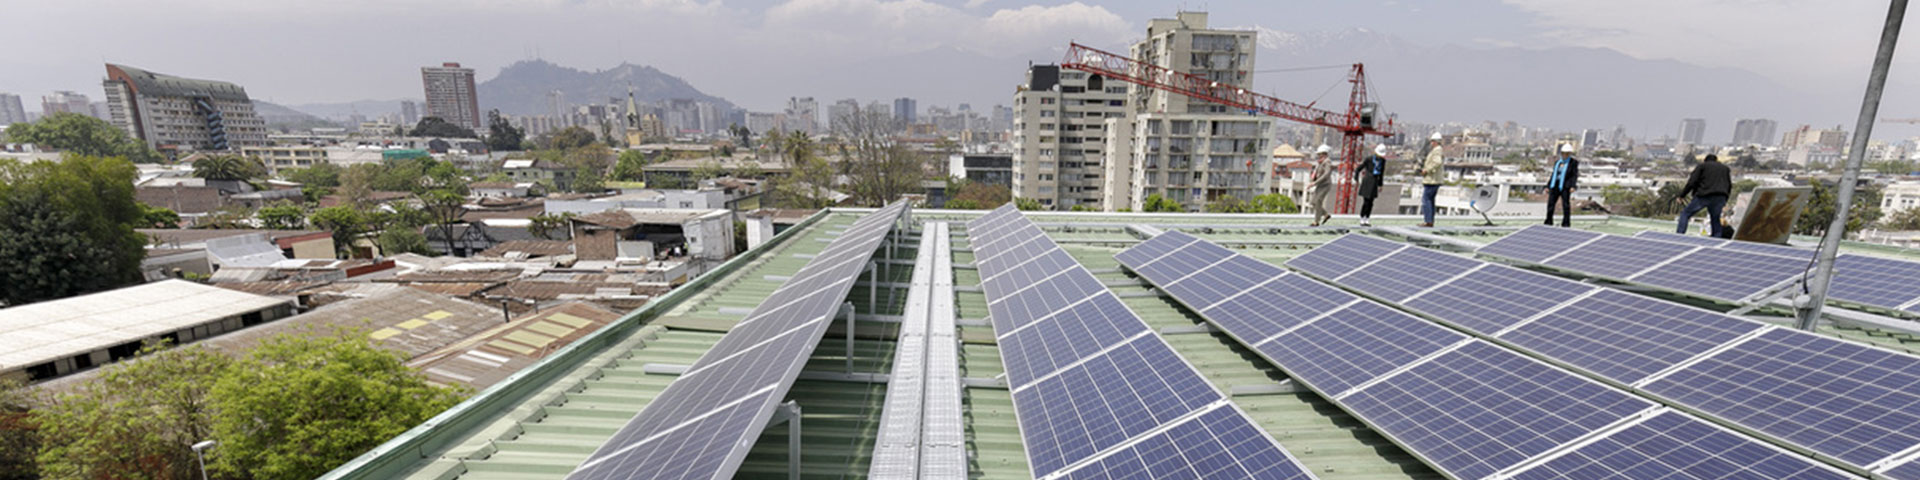 Photovoltaic panels on a factory roof